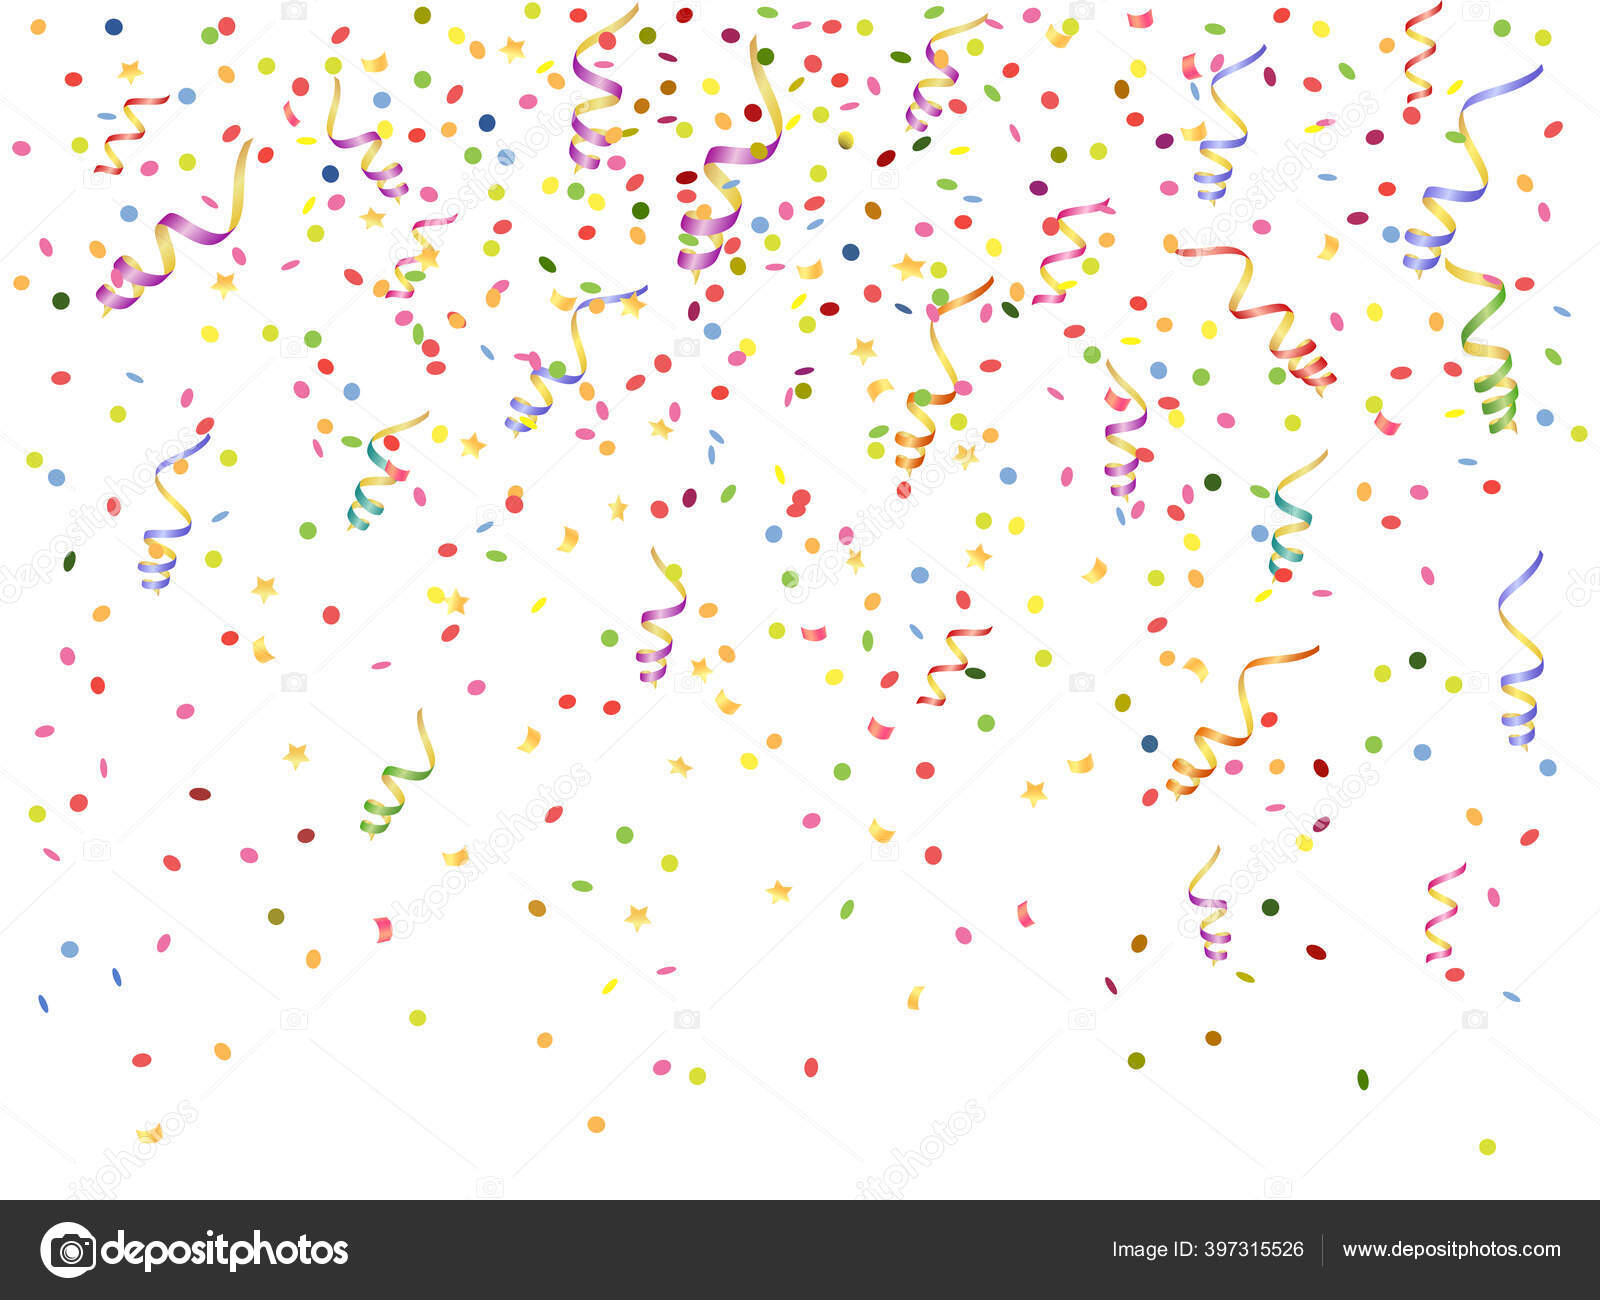 31,200+ Streamers And Confetti Stock Photos, Pictures & Royalty